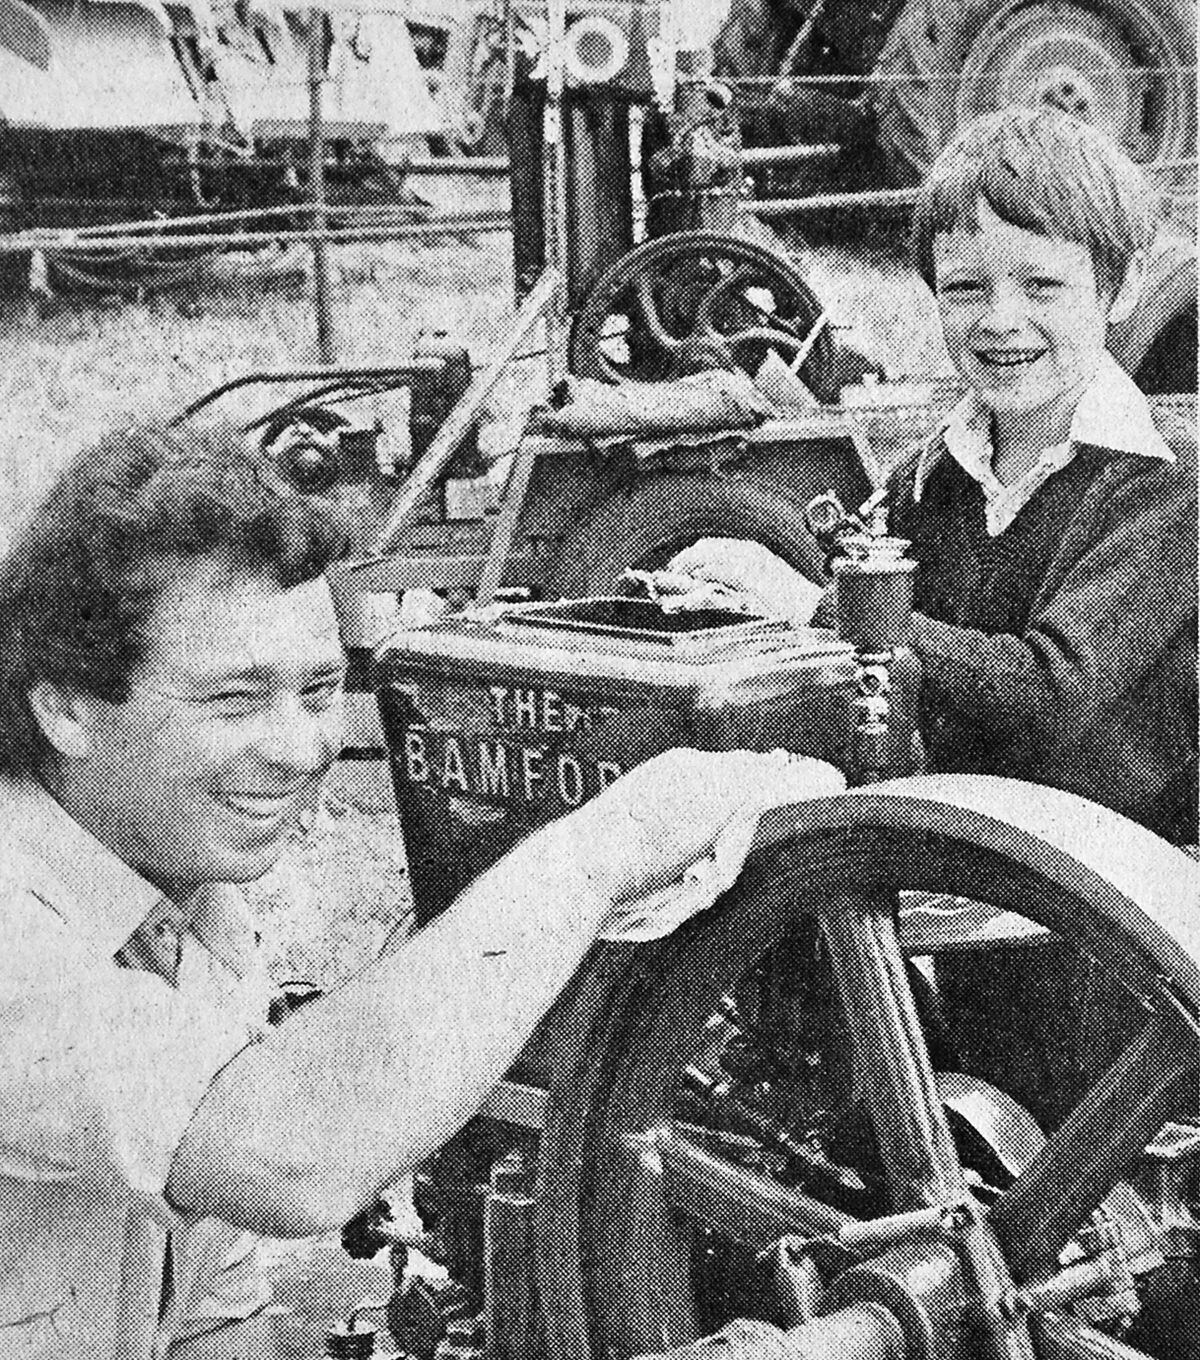 Mr Brian Redman, of Stanton Lacy, with his son Stuart, putting a shine on their Bamford oil engine at the Burwarton Show in August, 1976